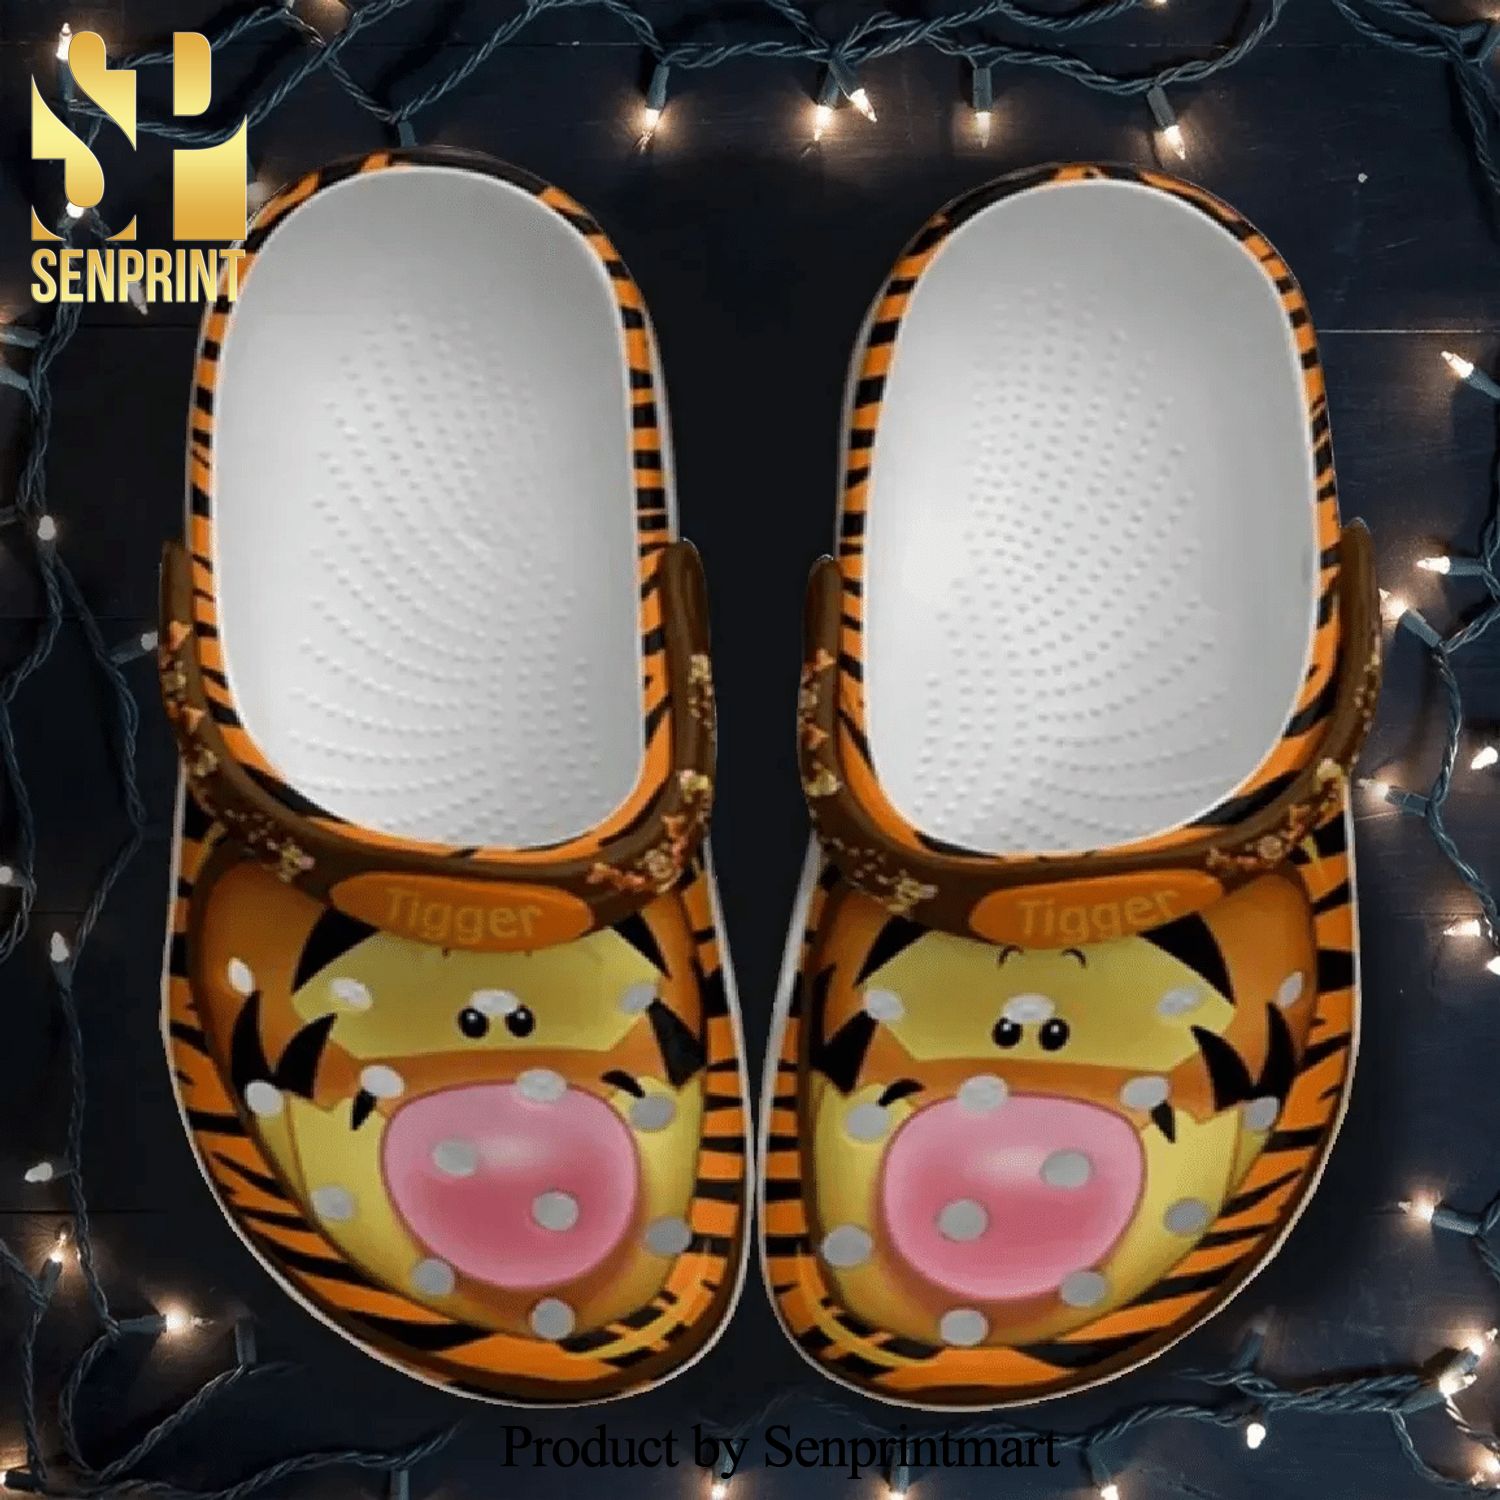 Tigger Winnie-The-Pooh For Lover Full Printing Crocs Shoes